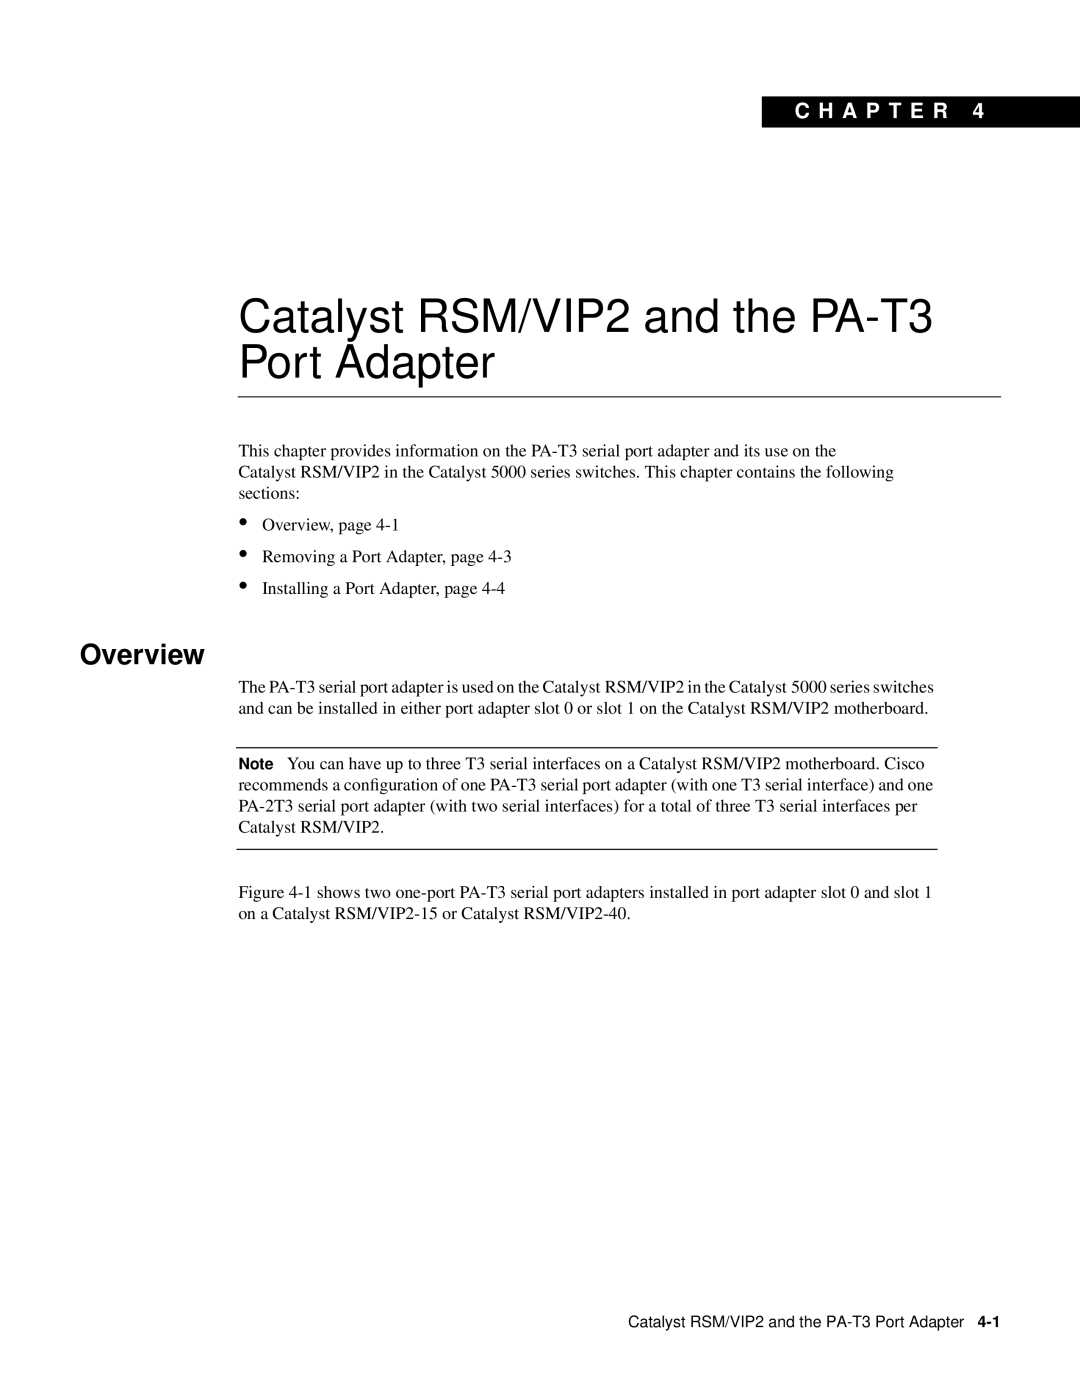 Cisco Systems manual Catalyst RSM/VIP2 and the PA-T3 Port Adapter, Overview, C H A P T E R 